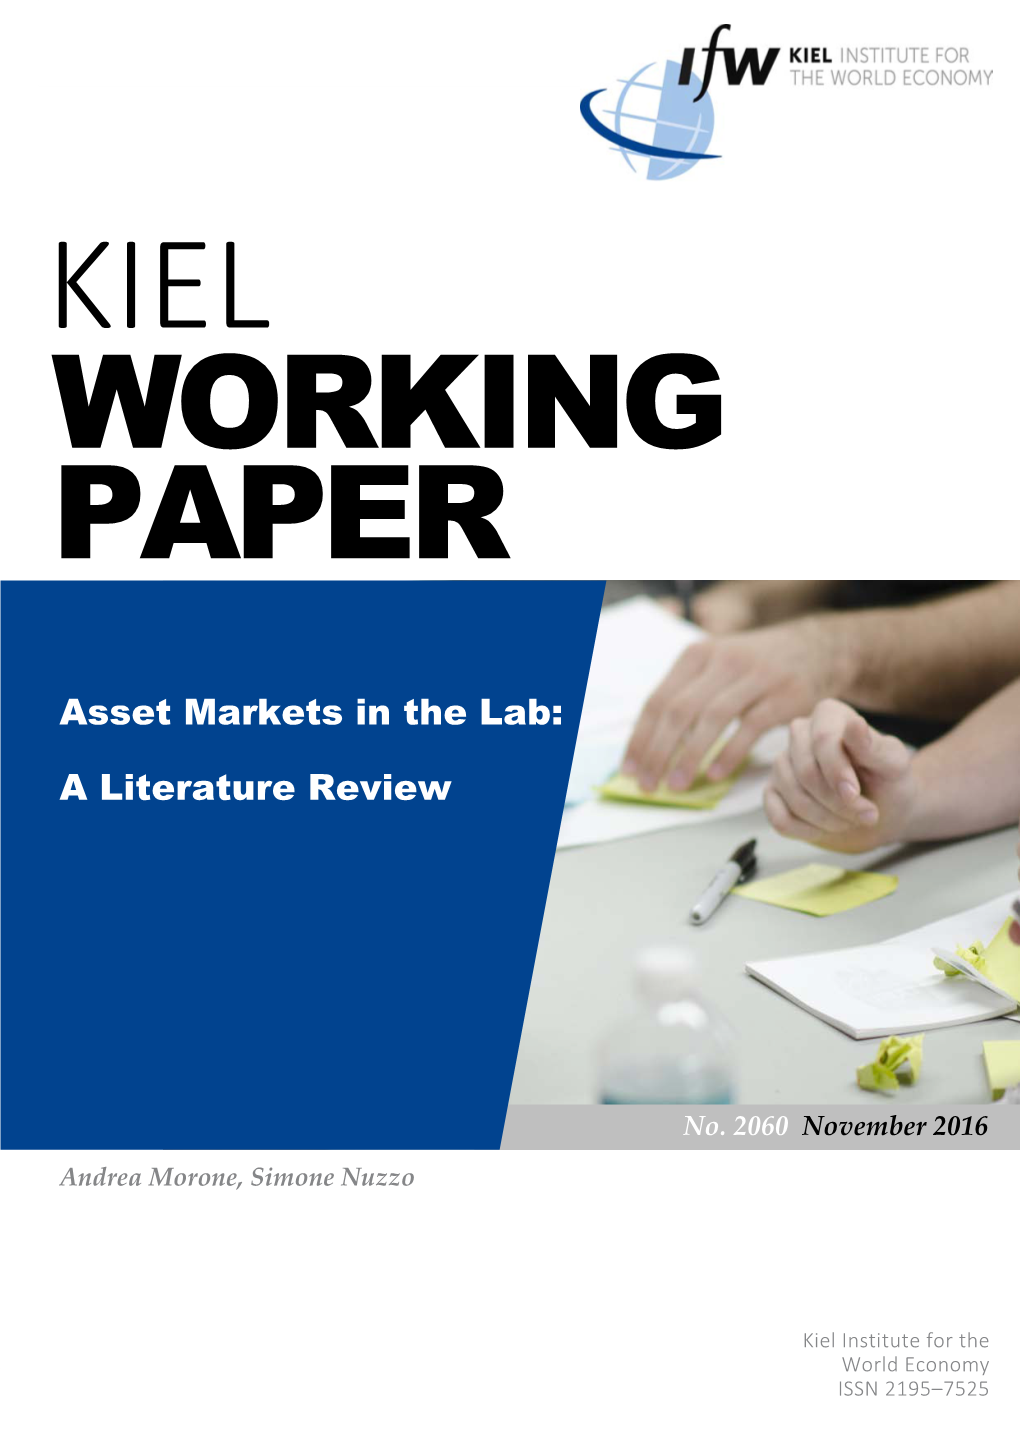 Asset Markets in the Lab: a Literature Review